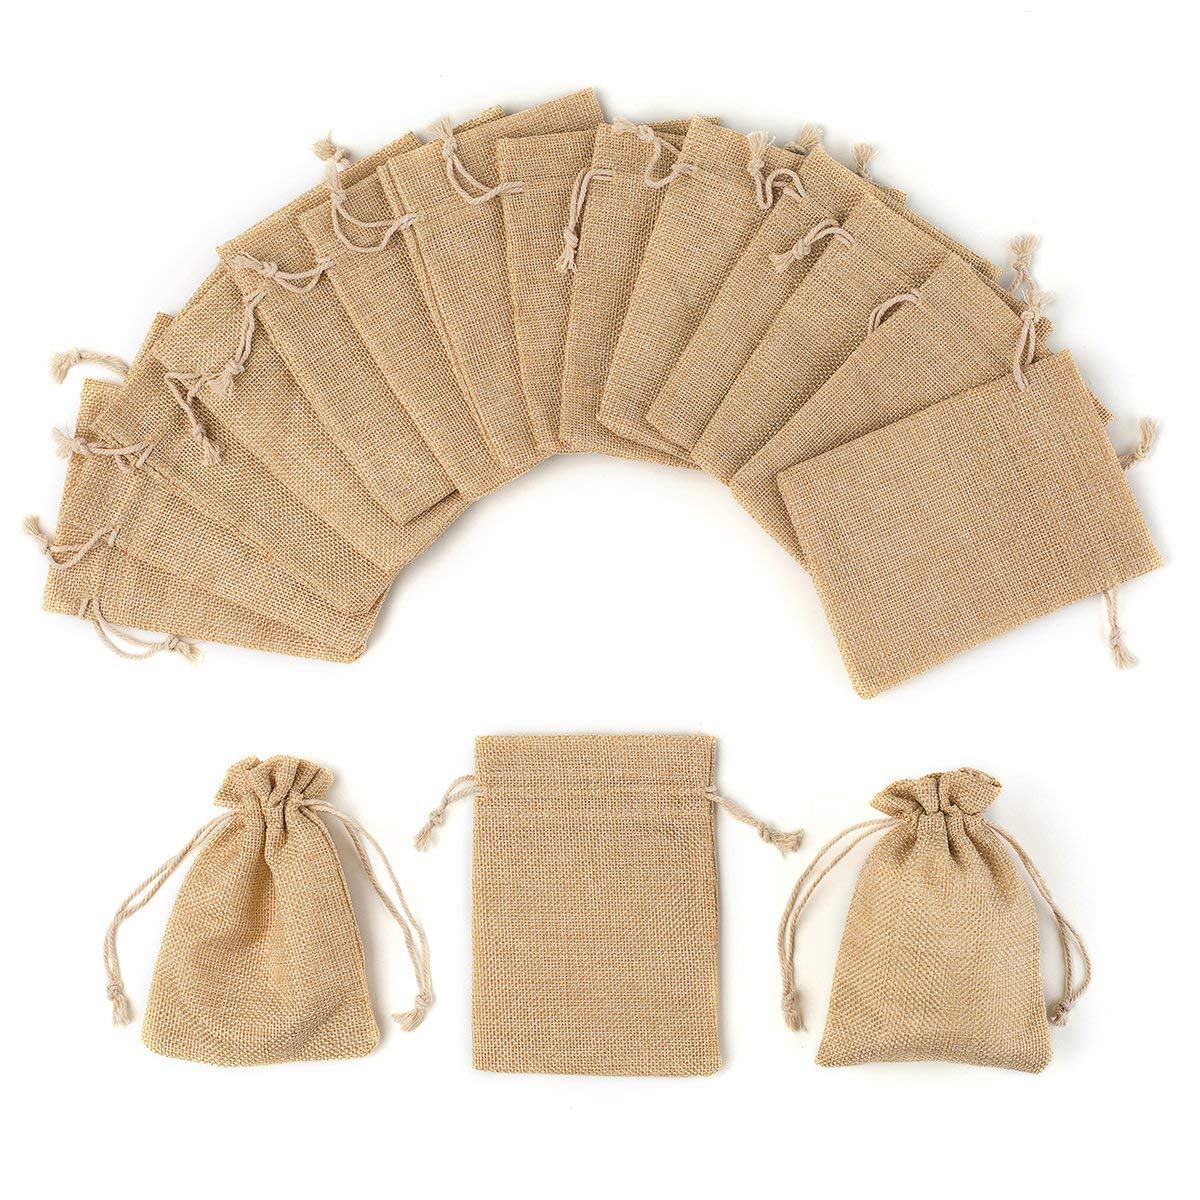 YUXIER Burlap Bags Drawstring Bag Party Favor Bags-5.3x3.7inch Pack of 25 for Baby Shower Wedding Party Presents Jewelry Pouches Gift Bags